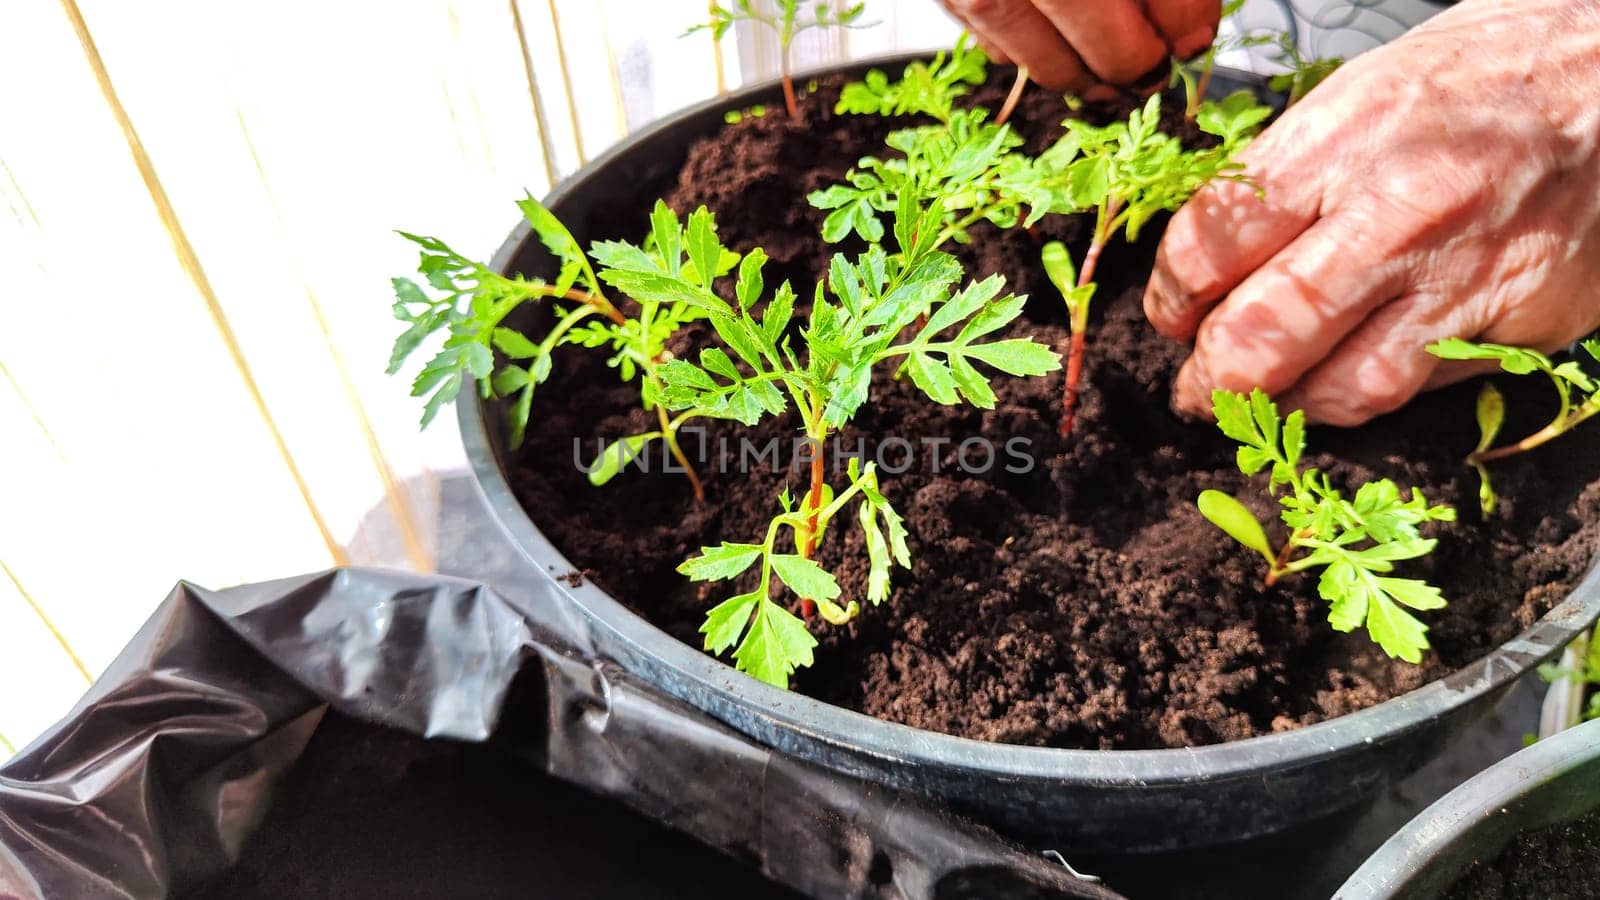 Planting marigold flowers in a pot. Reproduction of plants in spring. Young flower shoots and greenery for the garden. The hands of elderly woman, bucket of earth, green bushes and twigs with leaves